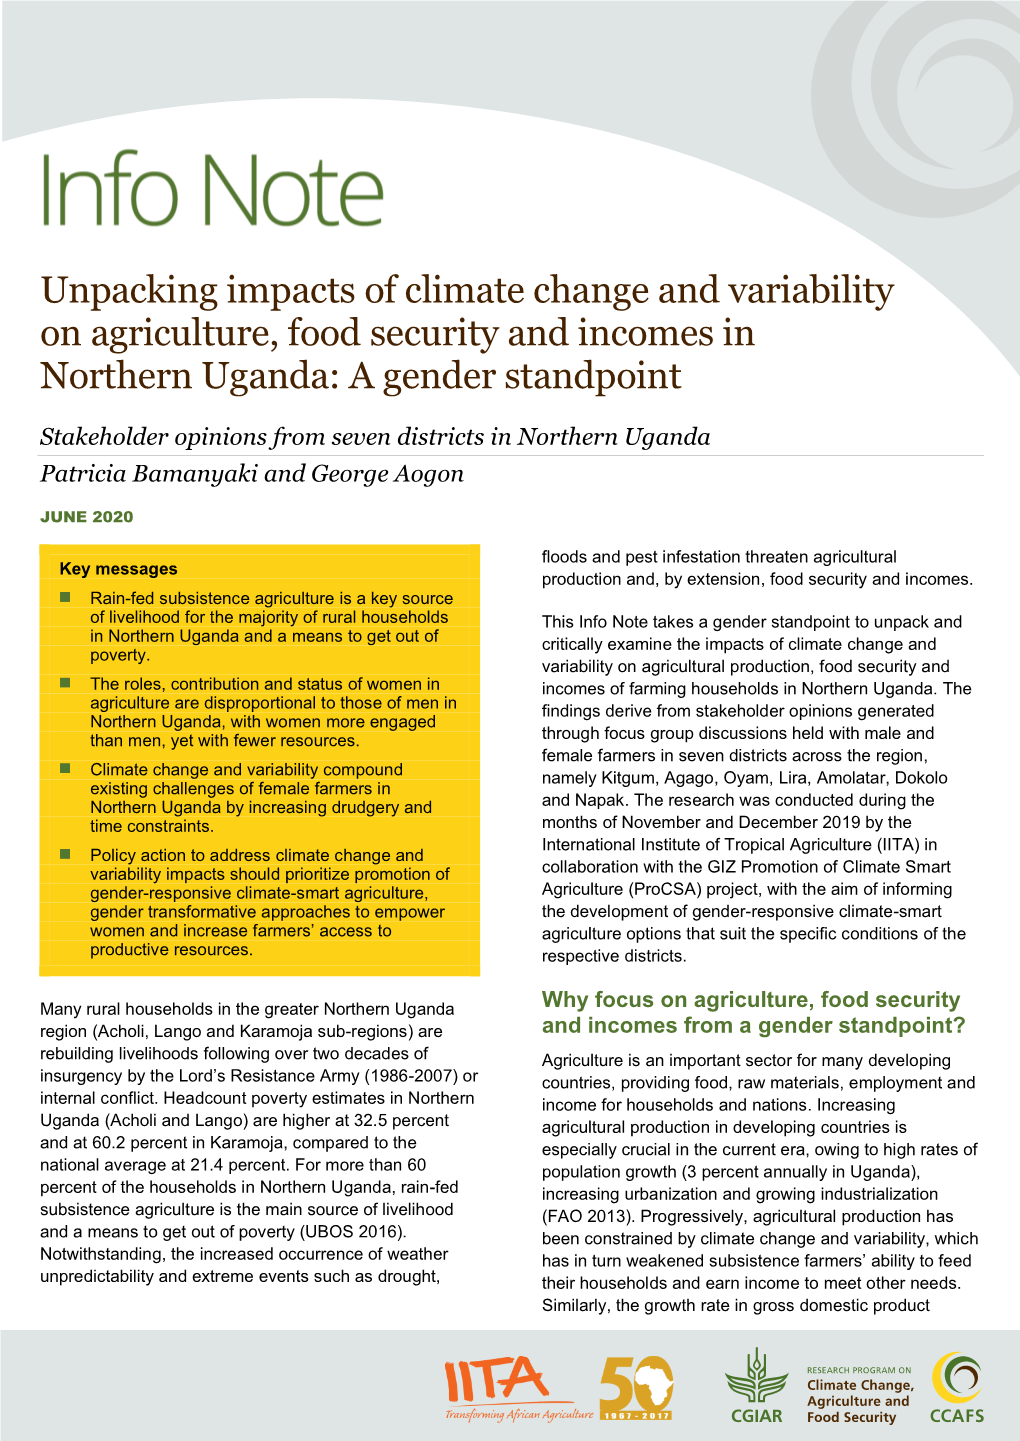 Unpacking Impacts of Climate Change and Variability on Agriculture, Food Security and Incomes in Northern Uganda: a Gender Standpoint